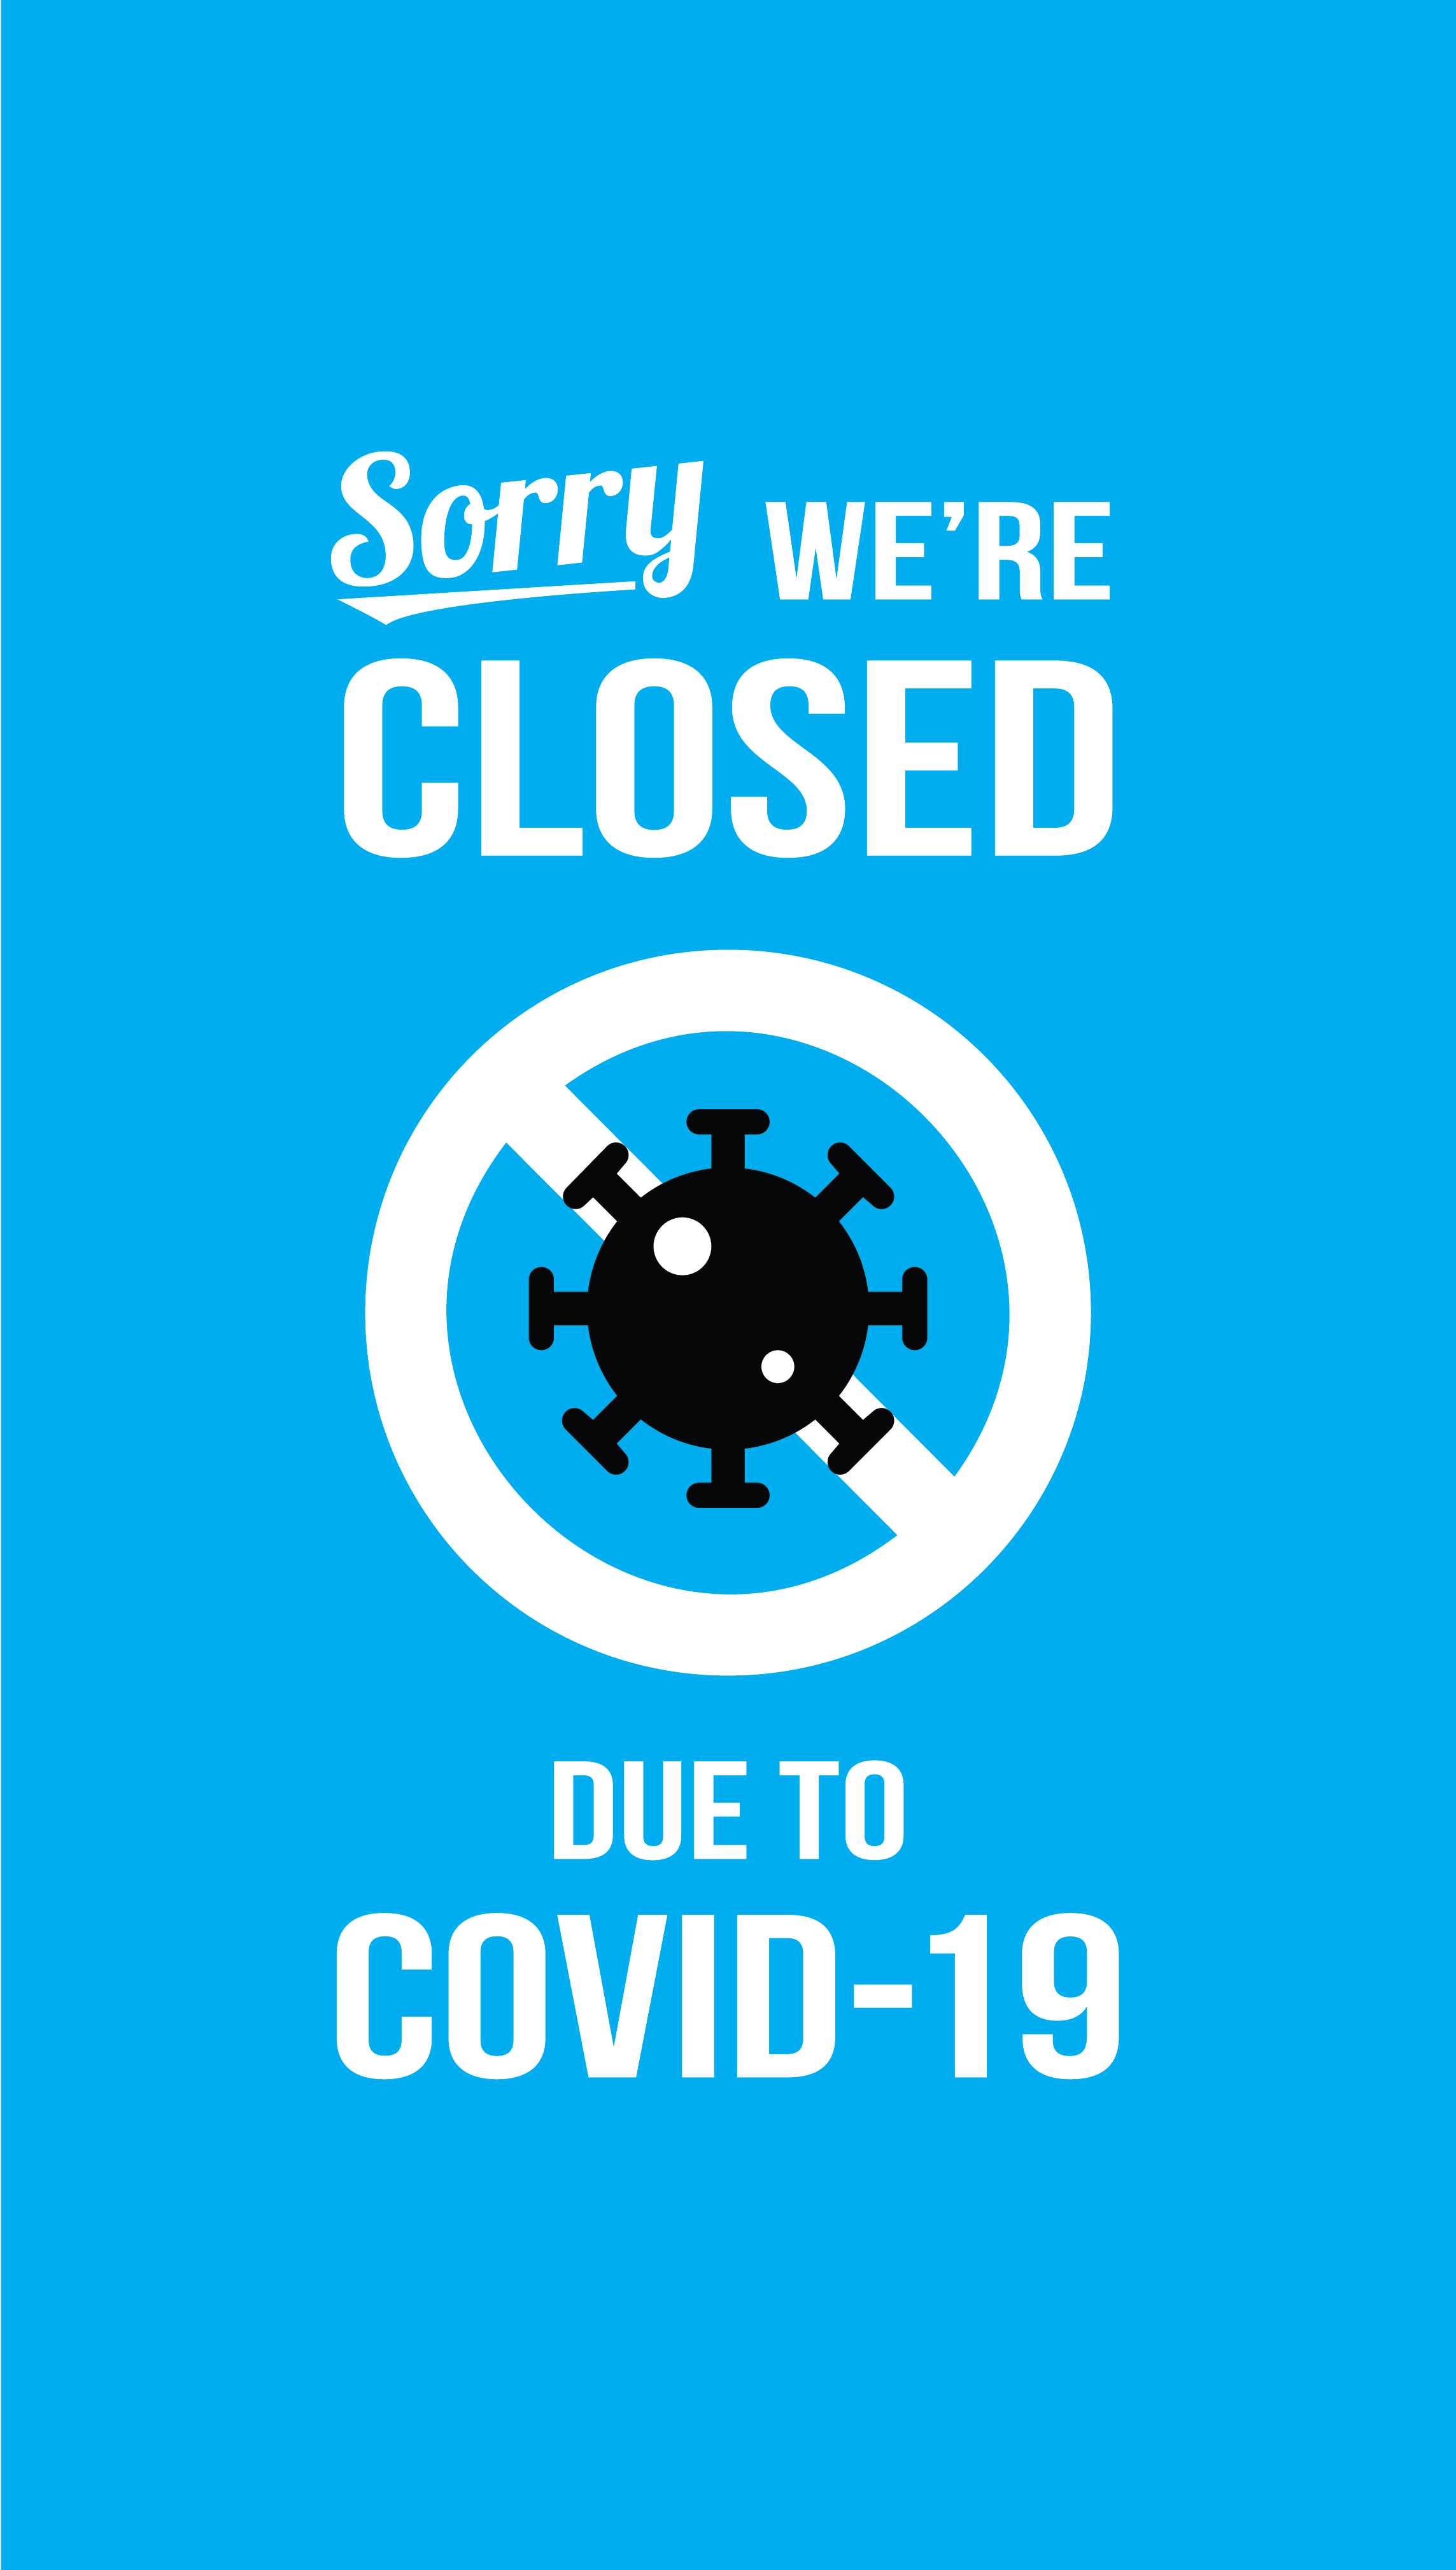 Sorry we're closed due to COVID-19